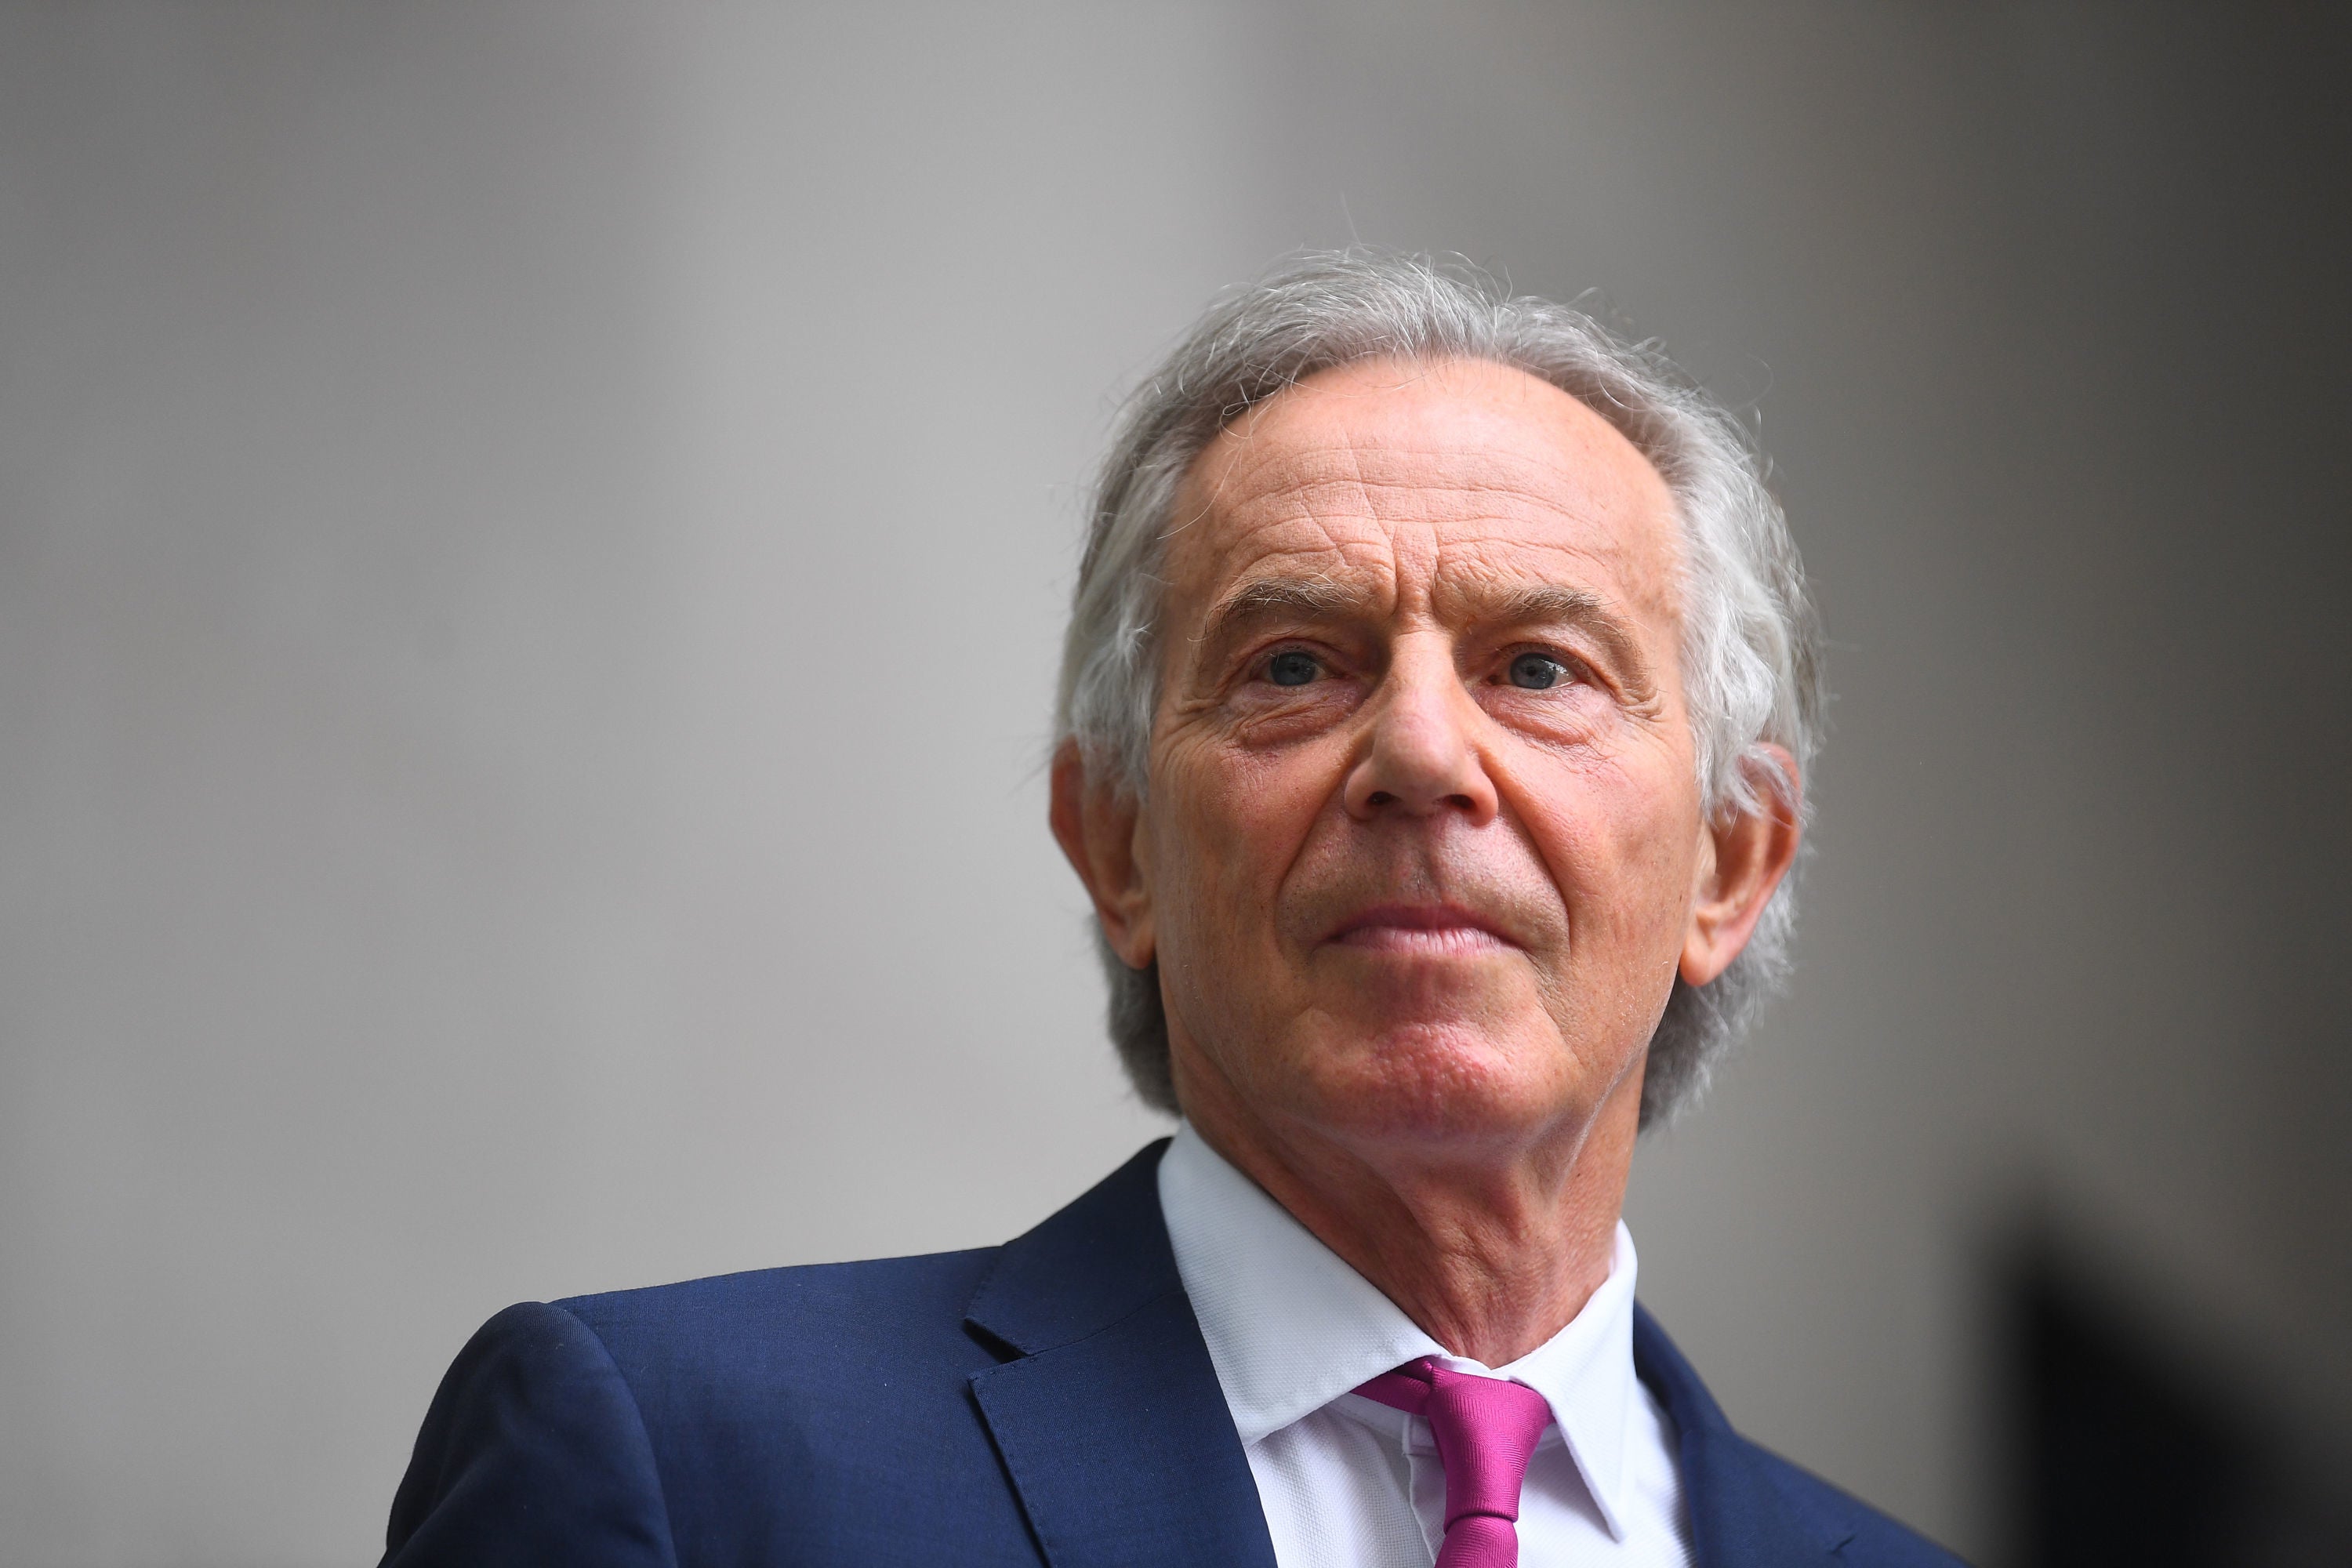 Blair’s recent speech on Brexit, the technology revolution and net zero carbon offered the kind of clear and imaginative thinking that governments need